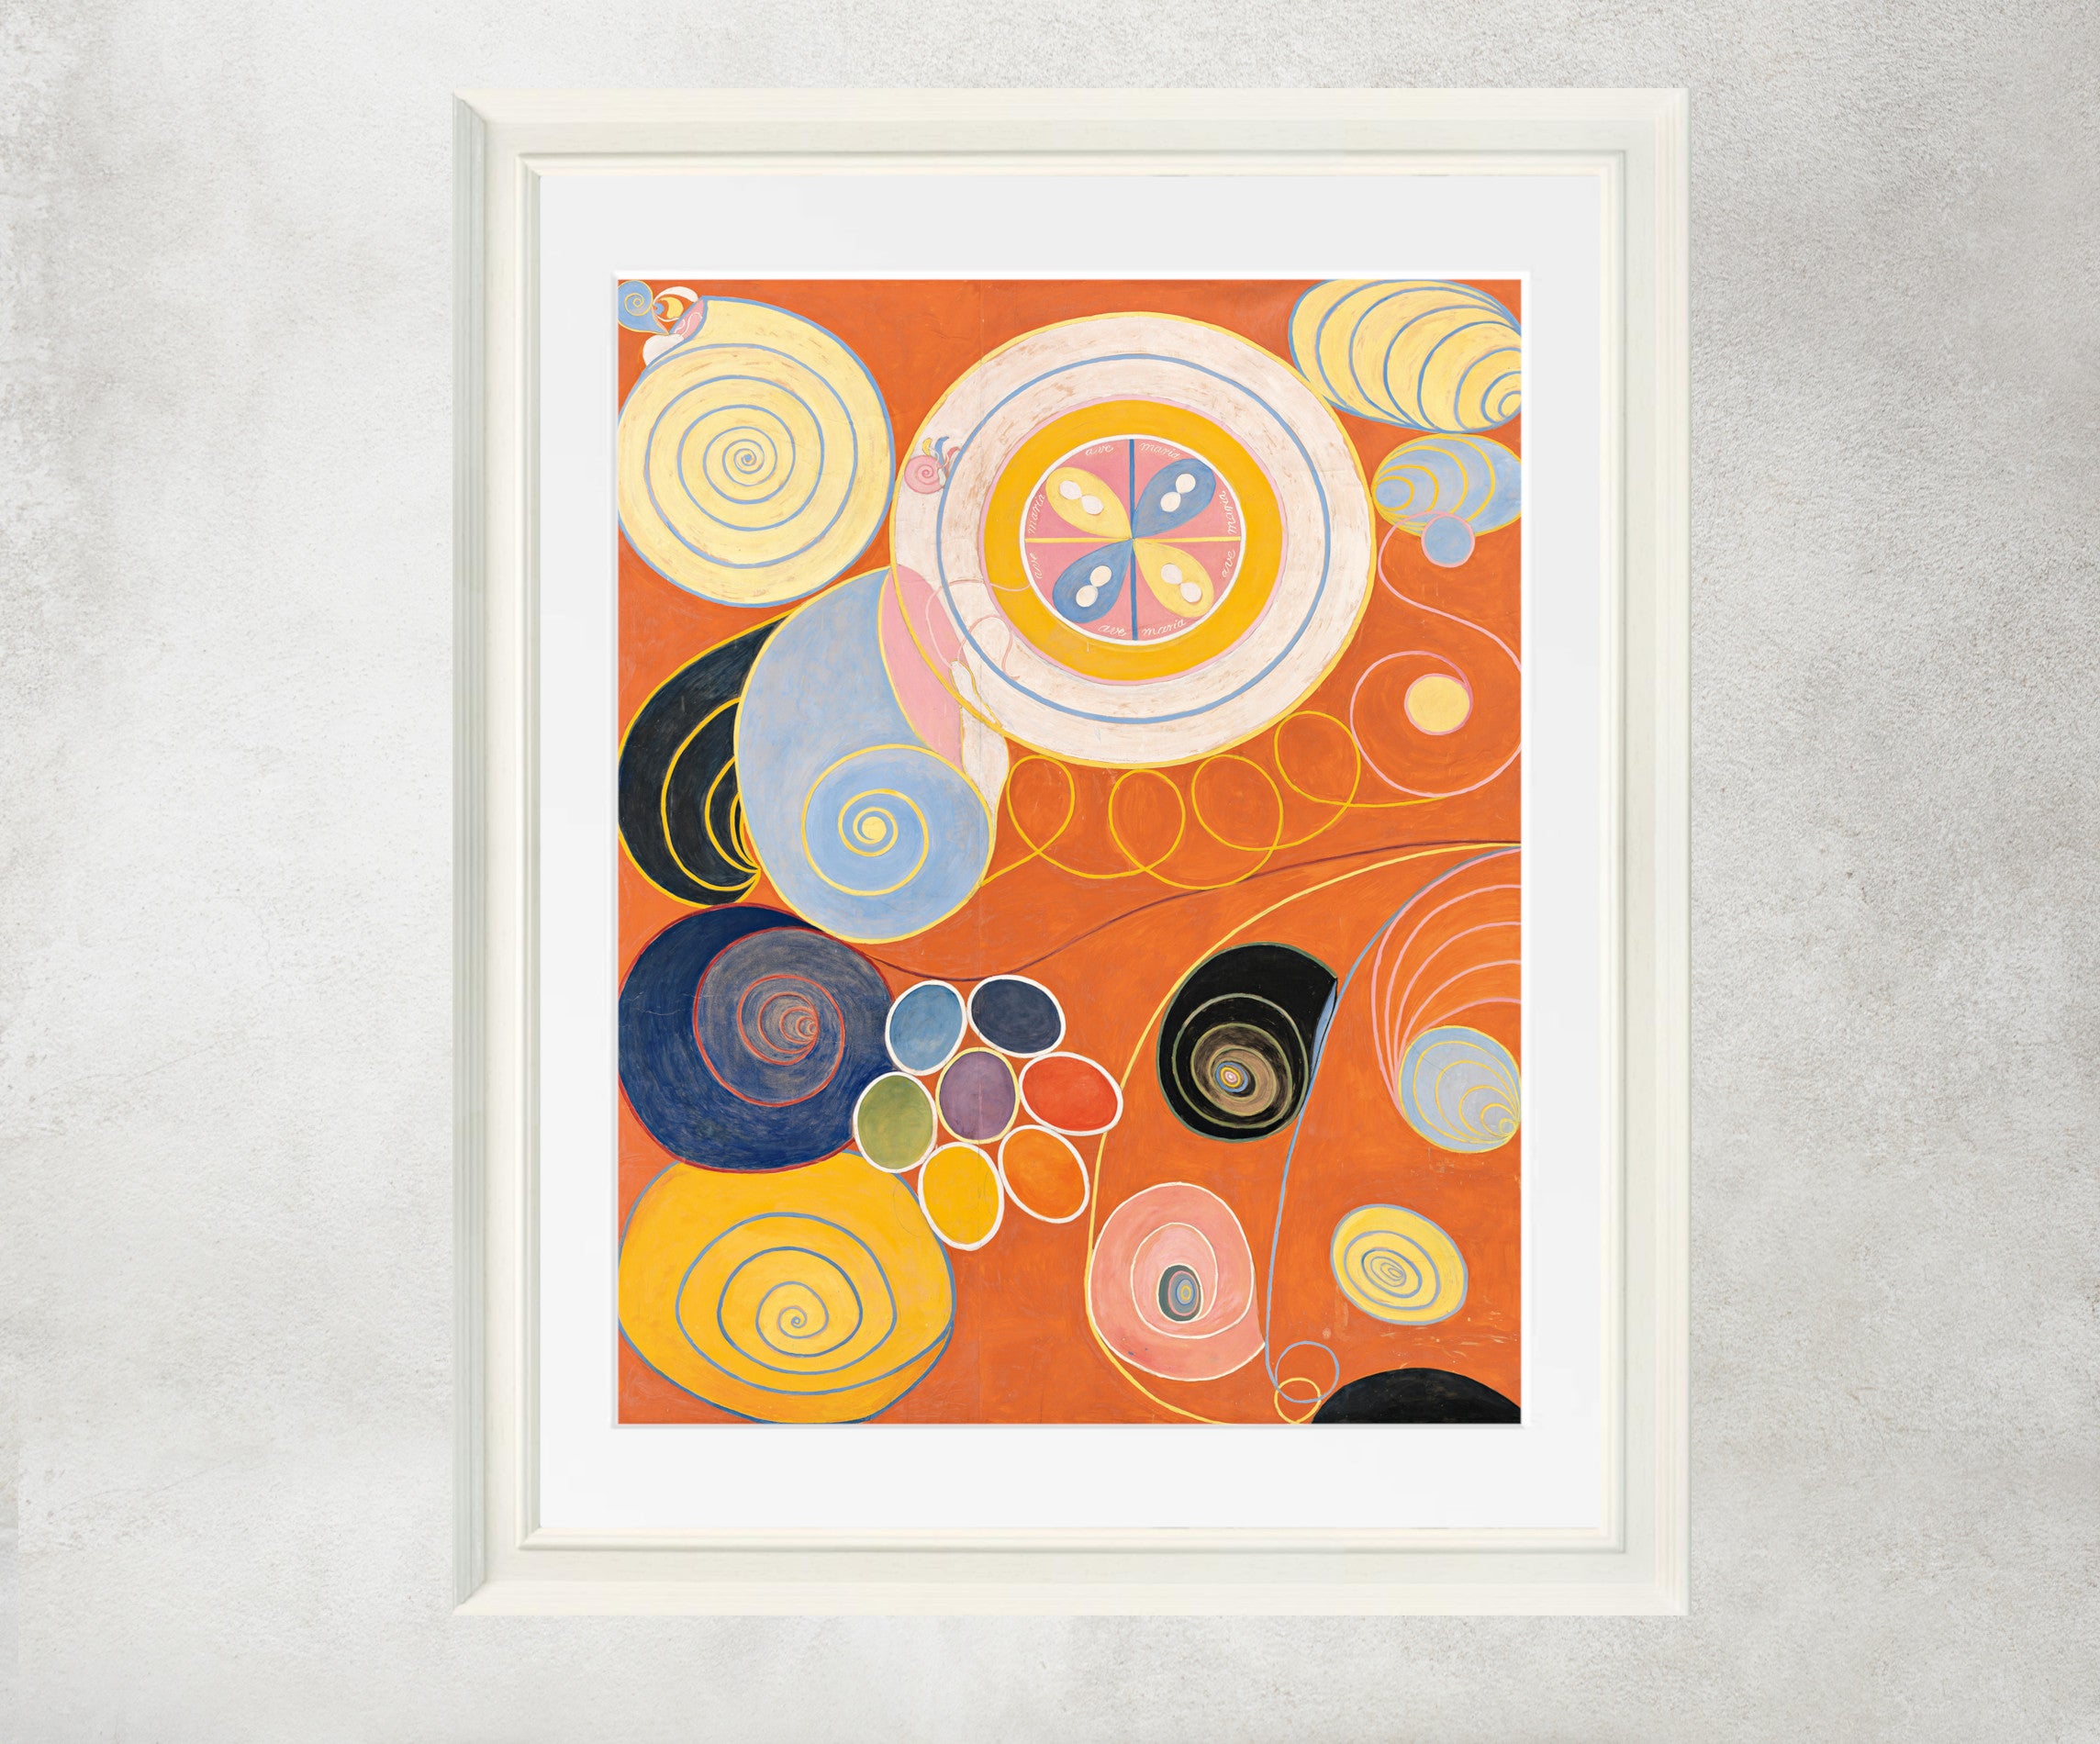 Hilma Af Klint Abstract Framed Art Print, The Ten Largest, No. 3 Youth